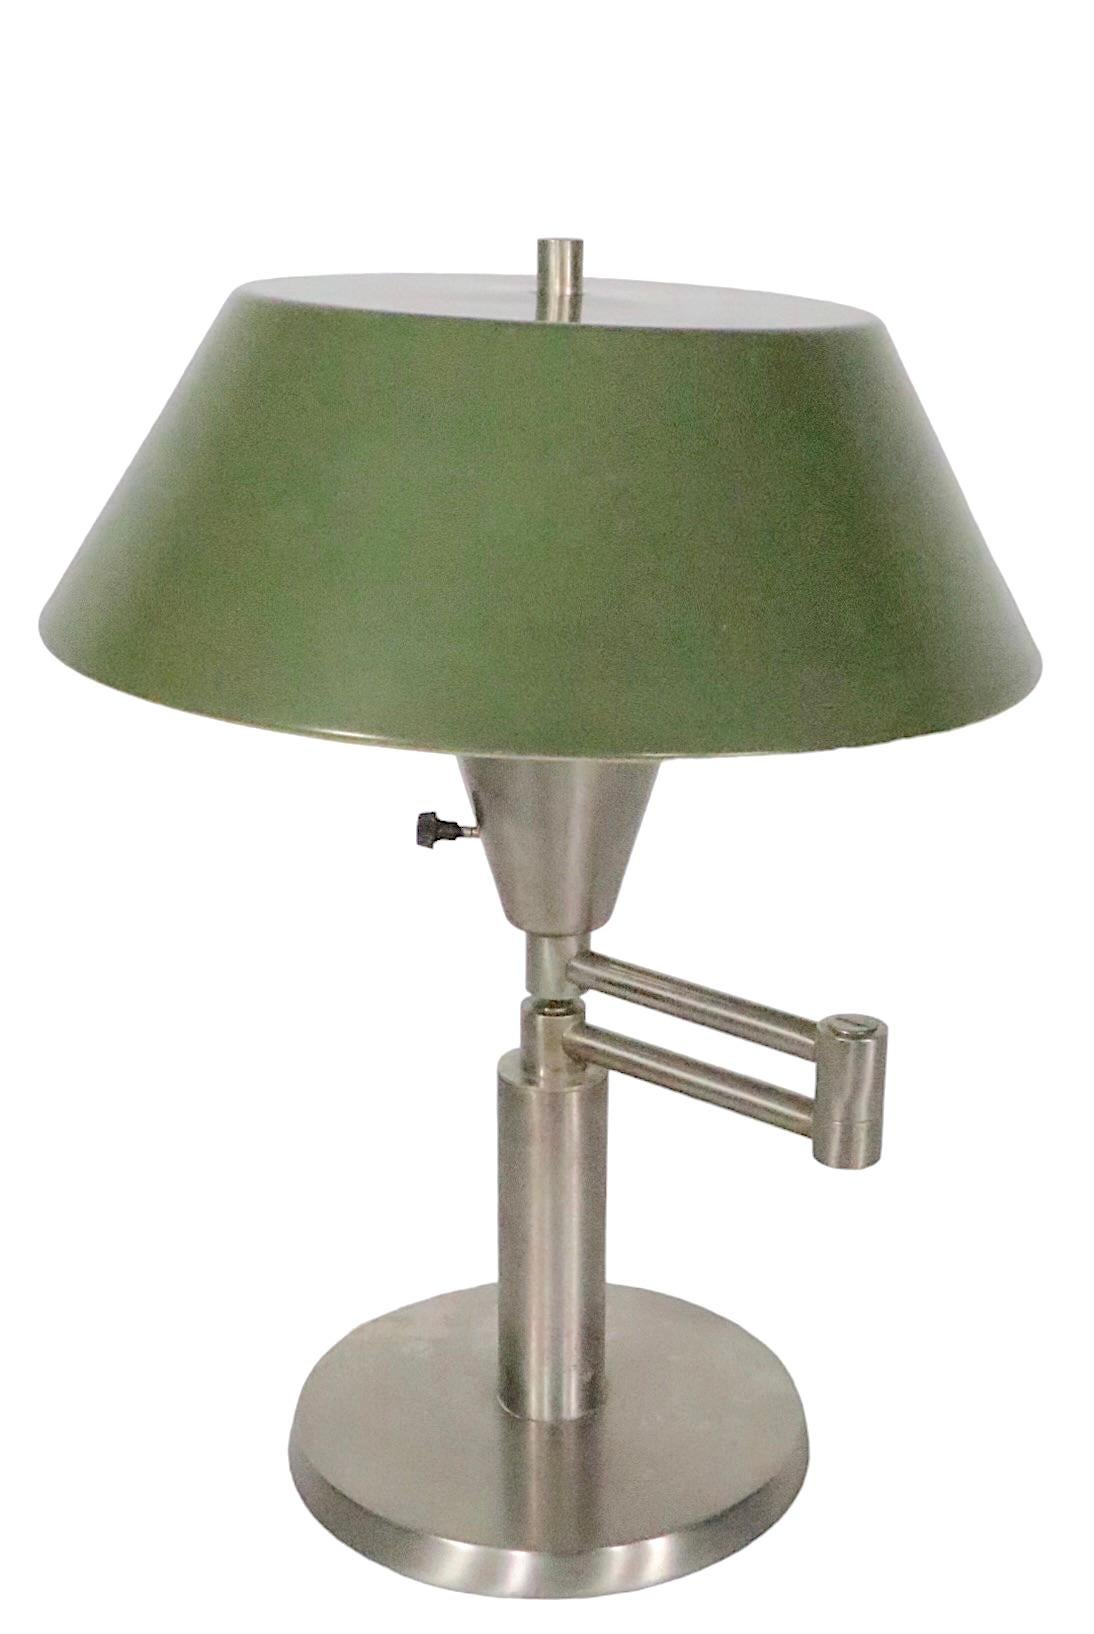 Iconic Walter Von Nessen Swing Arm Desk Lamp with Original Metal Shade For Sale 1